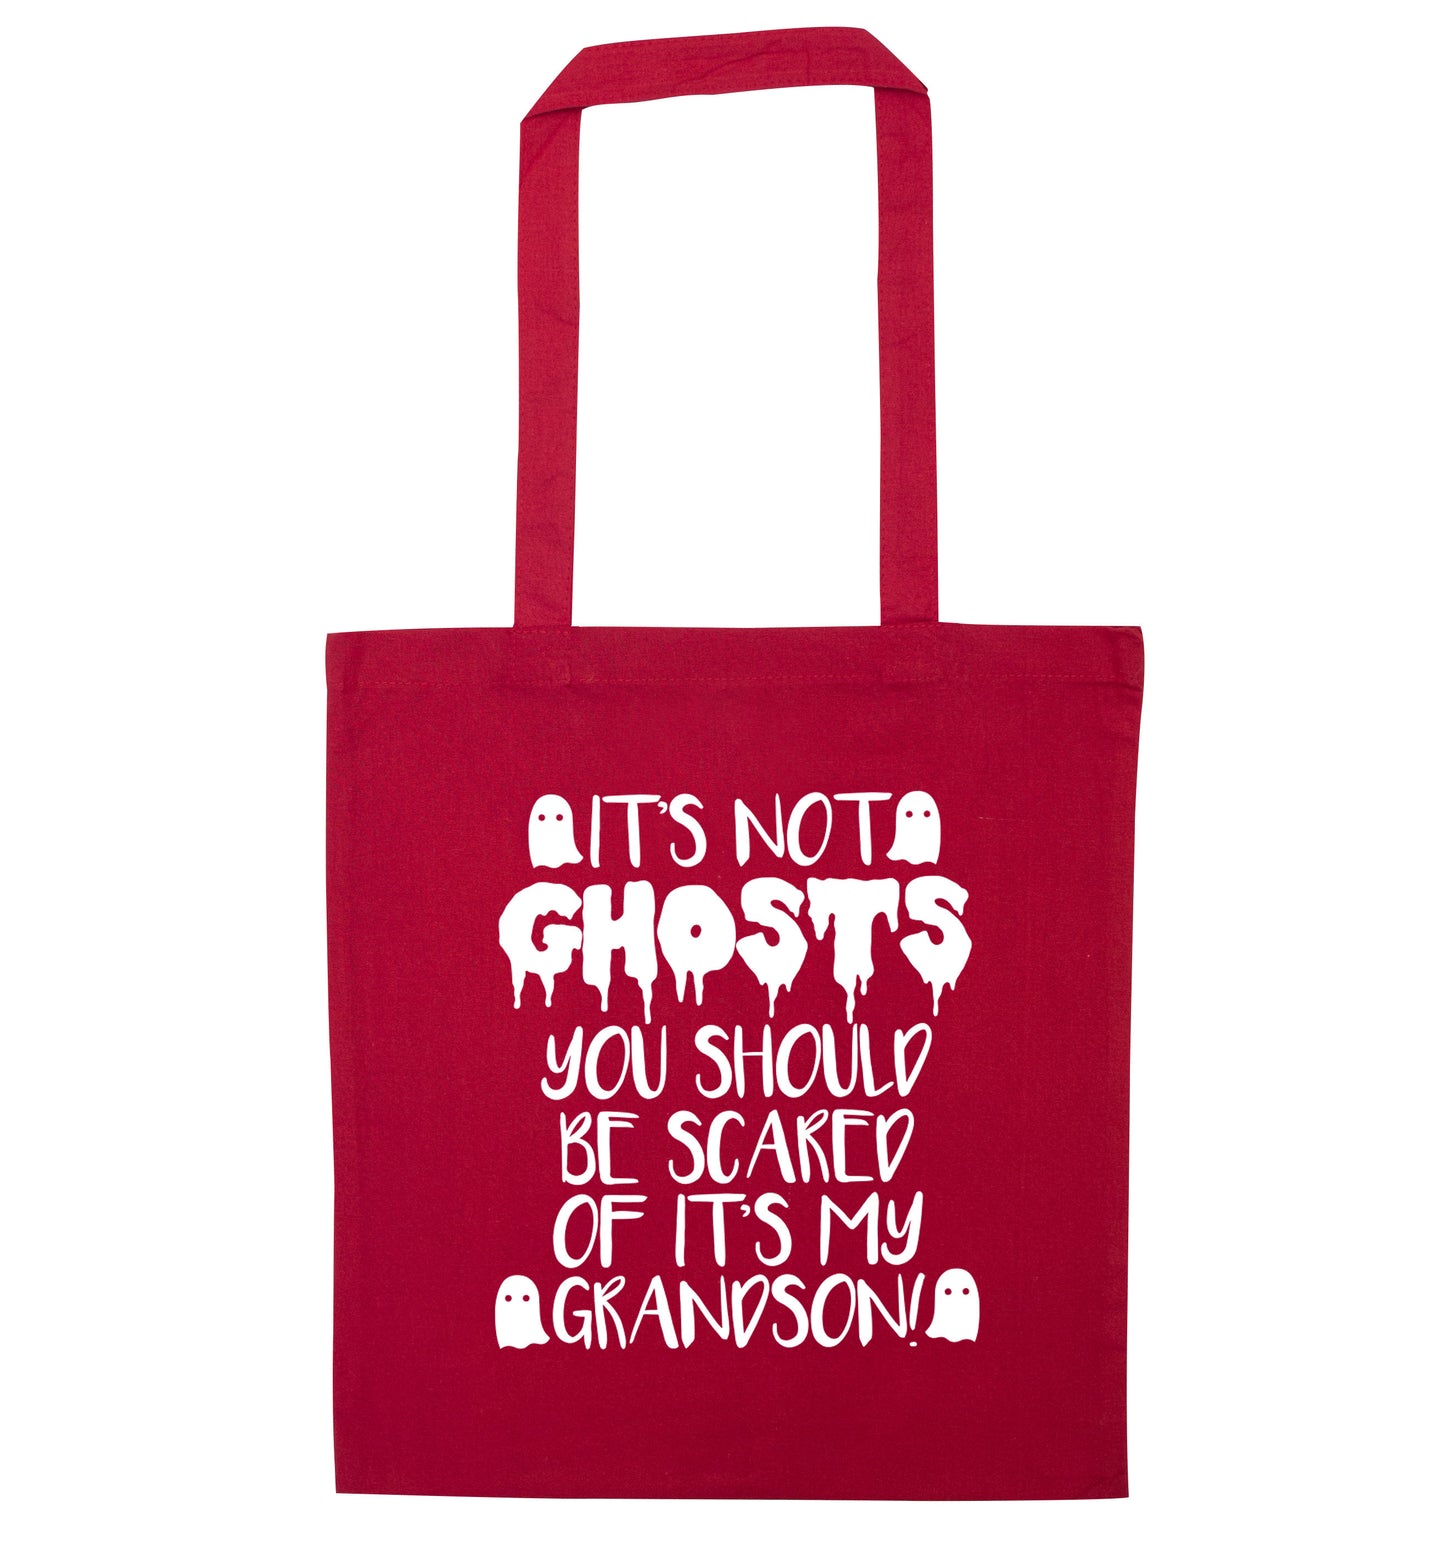 It's not ghosts you should be scared of it's my grandson! red tote bag